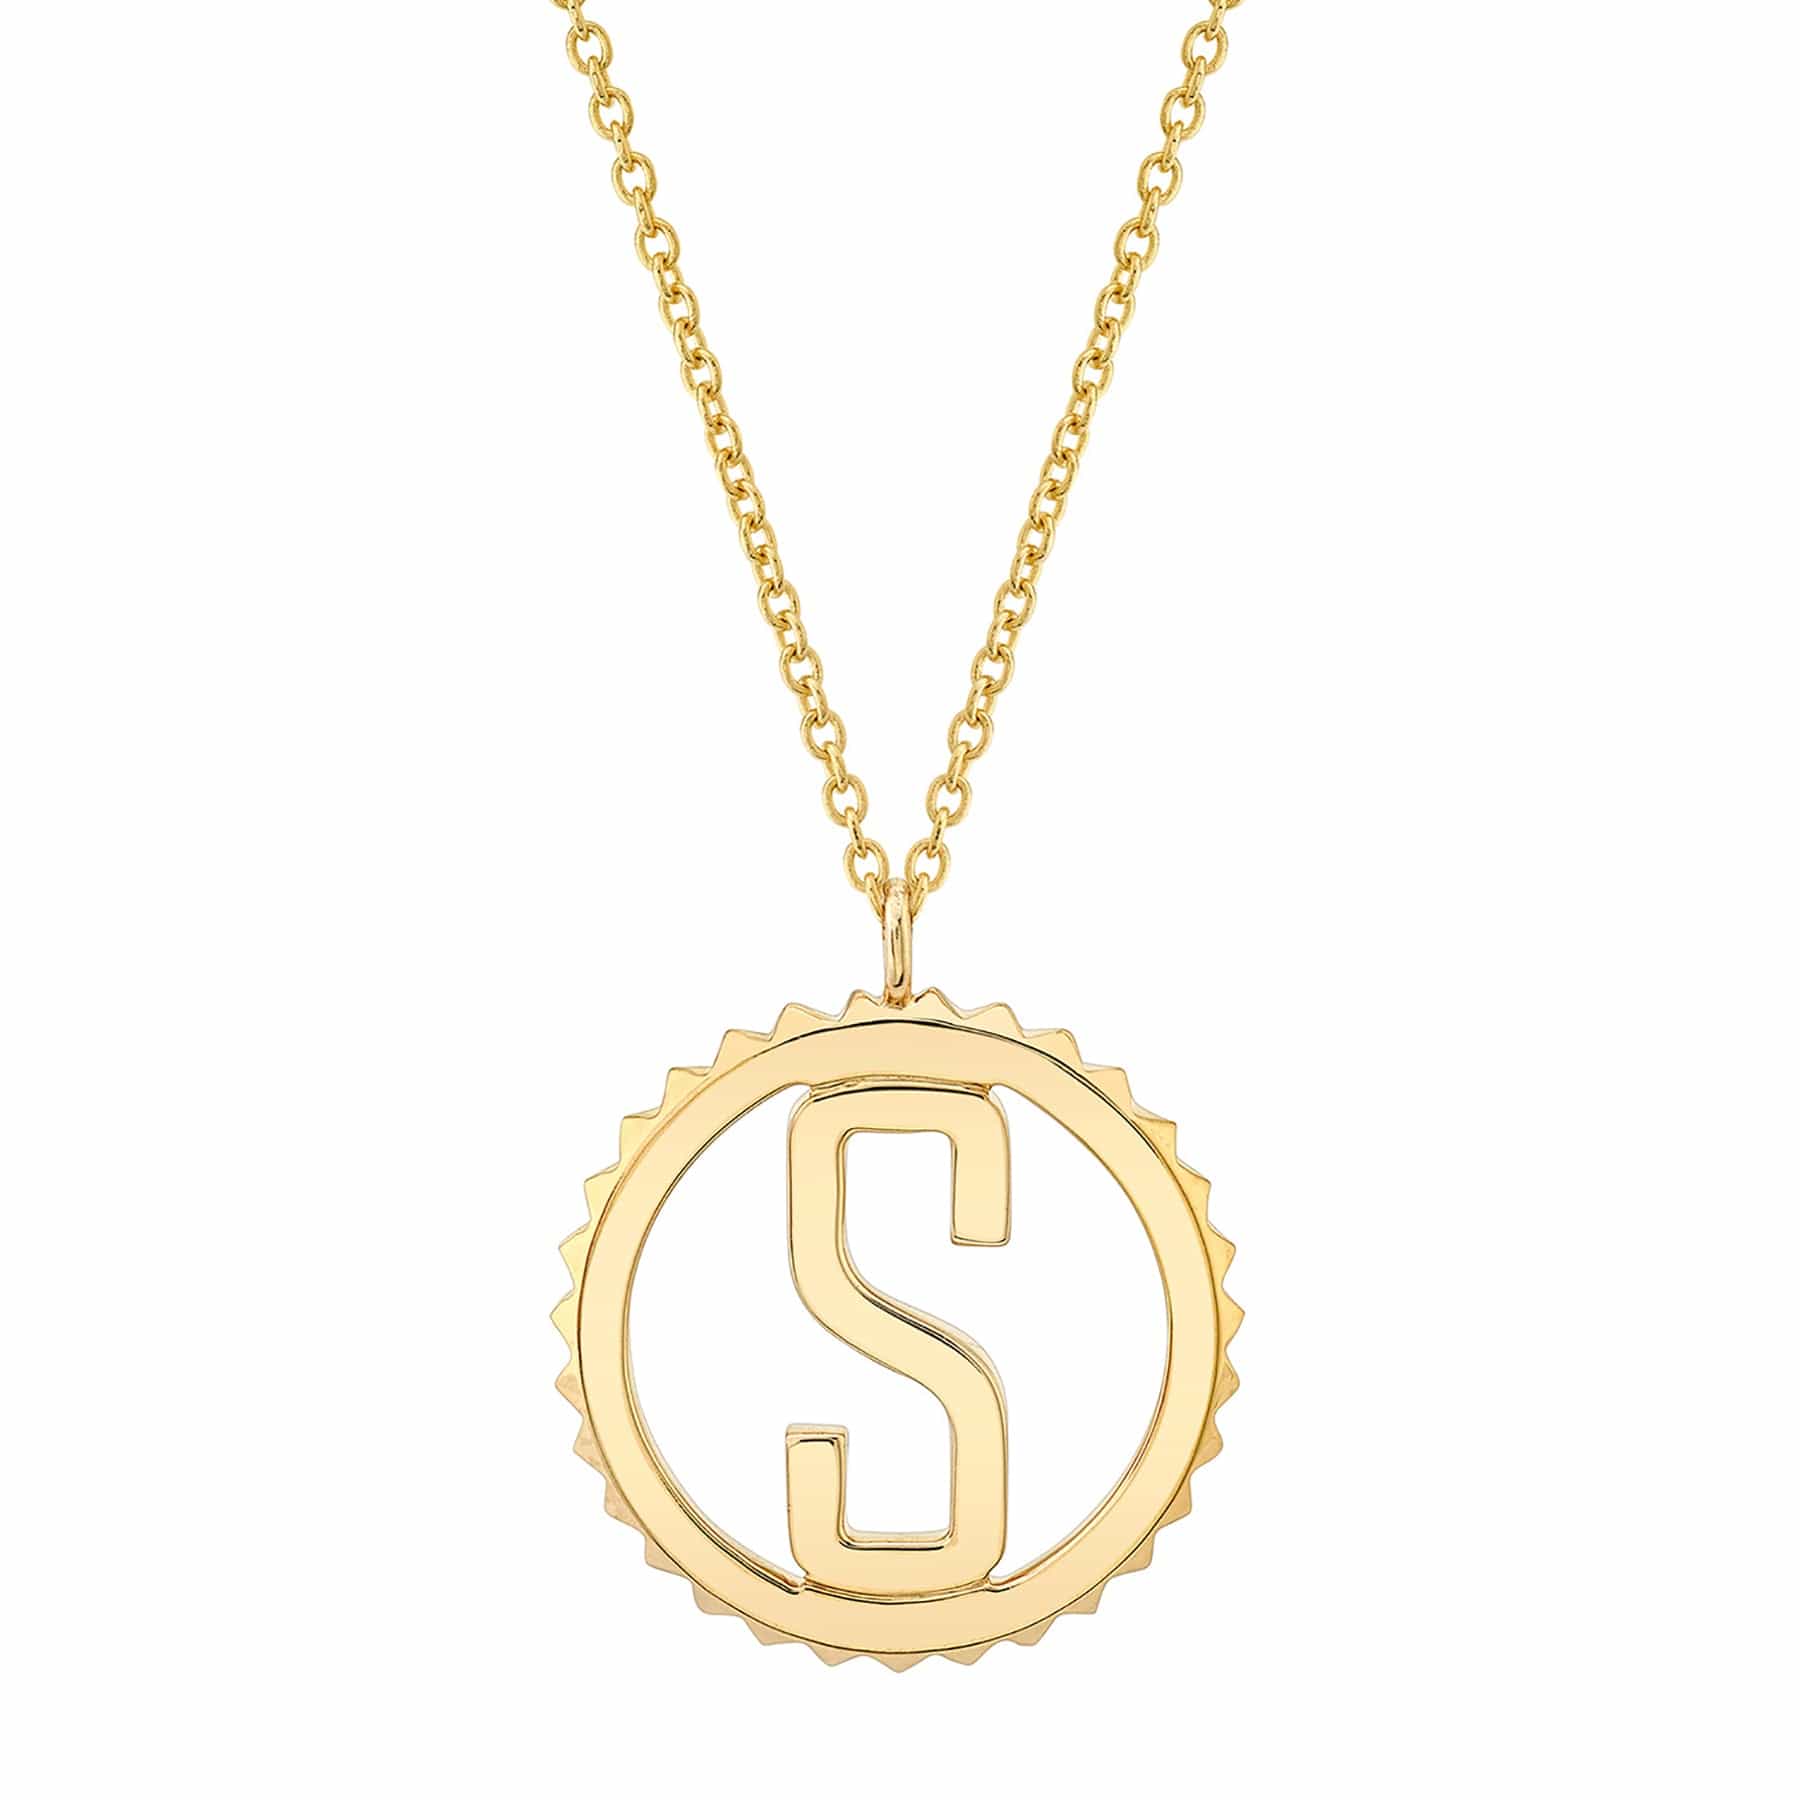 MICHAEL M Necklaces 14K Yellow Gold / S Tetra Initial Medallion P366YG